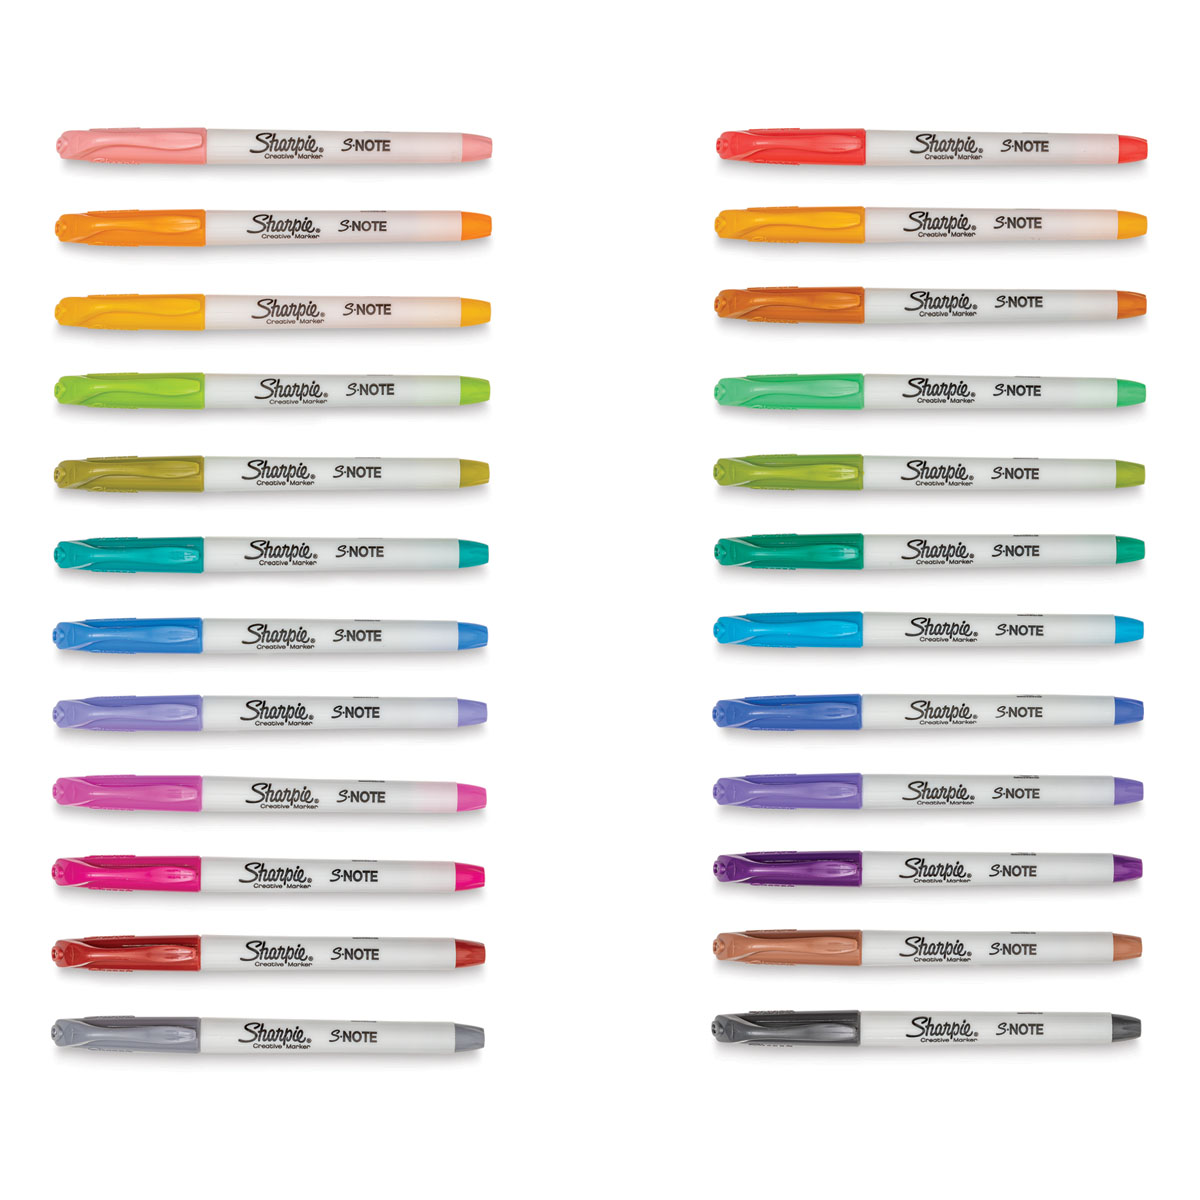 Colored Markers Clipart Graphic by Printable Images · Creative Fabrica